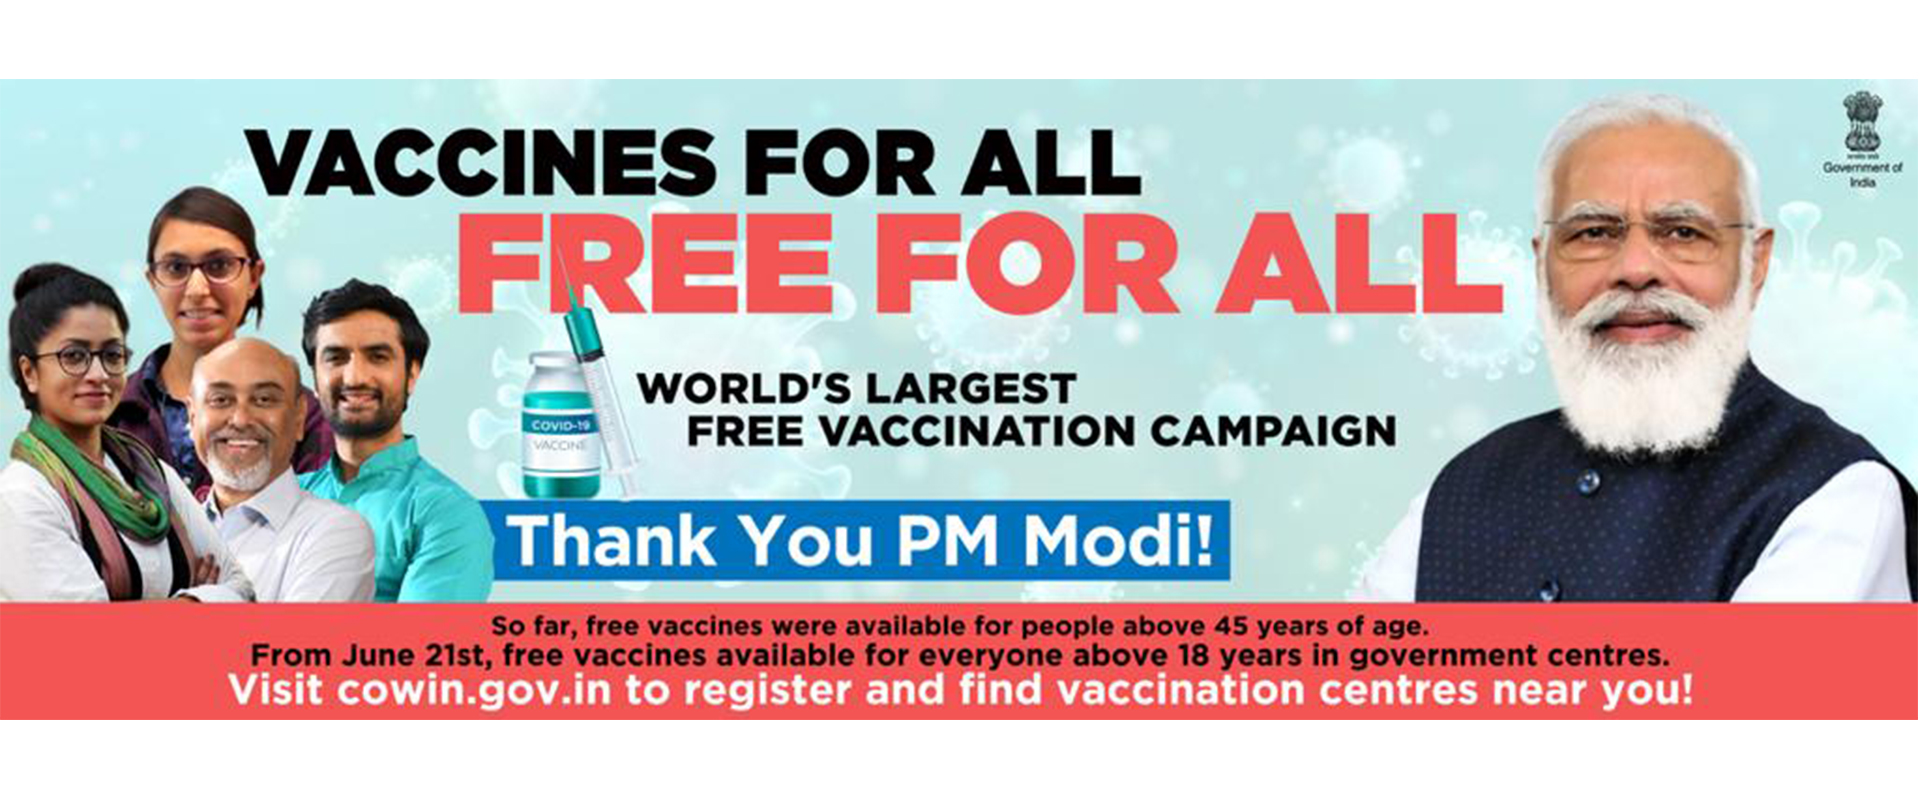 Vaccines for all